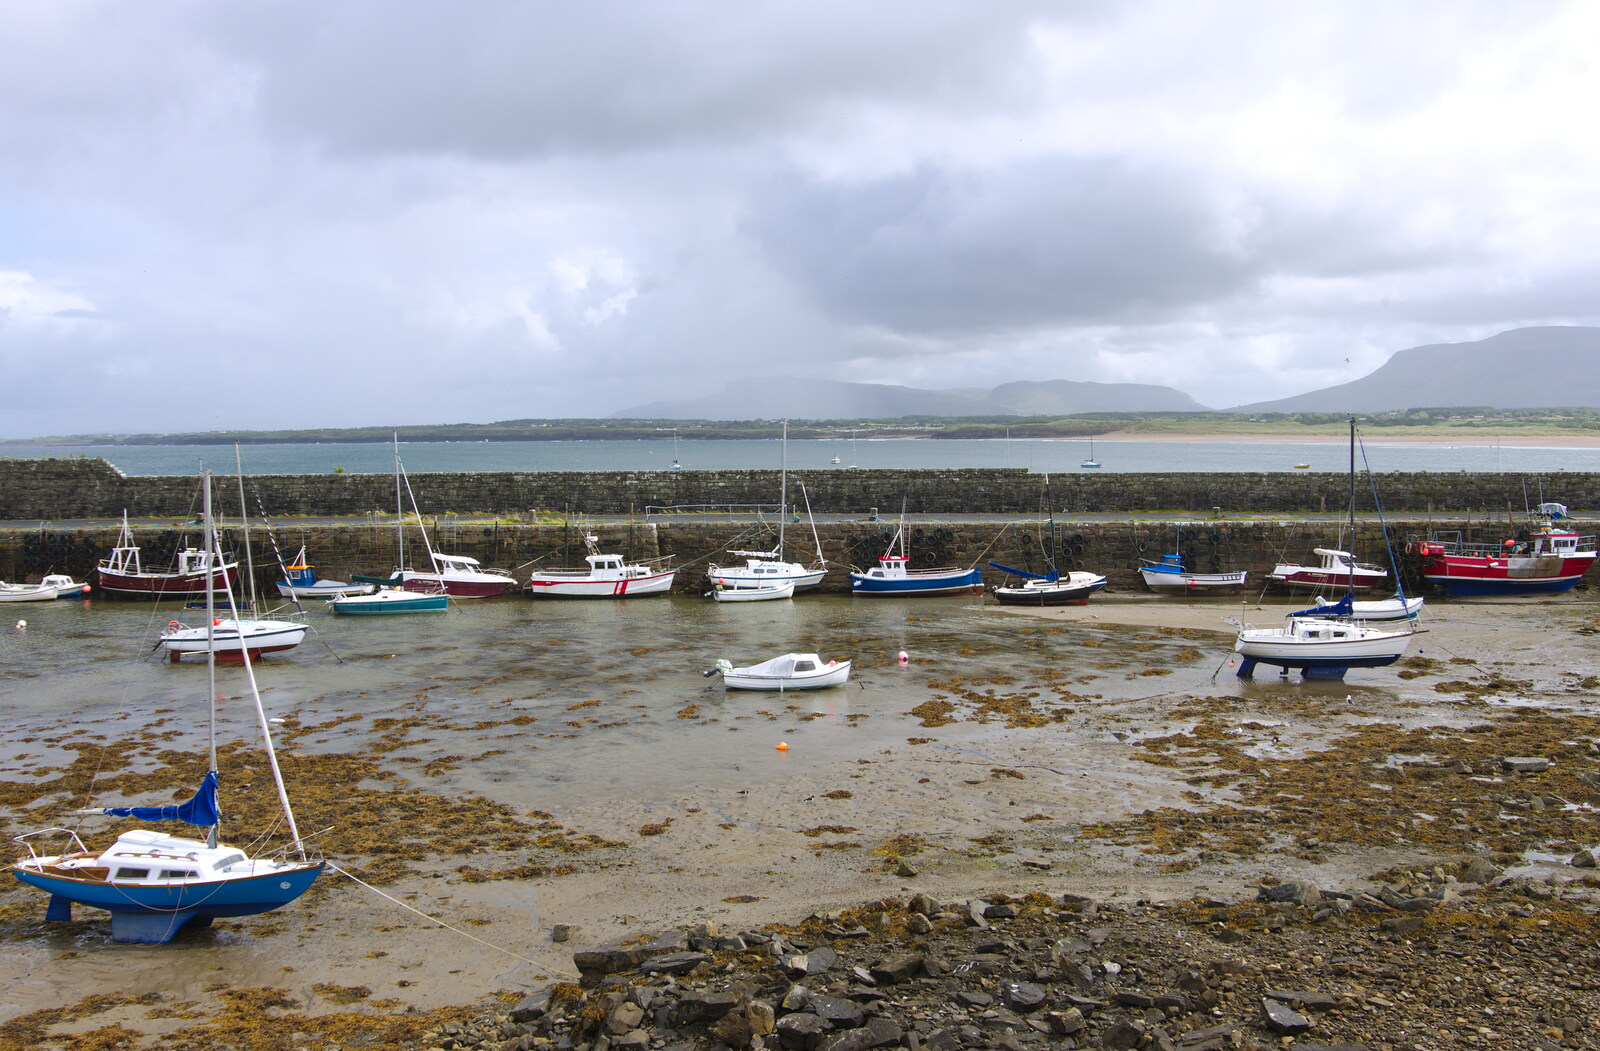 Boats in the harbour from Mullaghmore Beach and Marble Arch Caves, Sligo and Fermanagh, Ireland - 19th August 2019